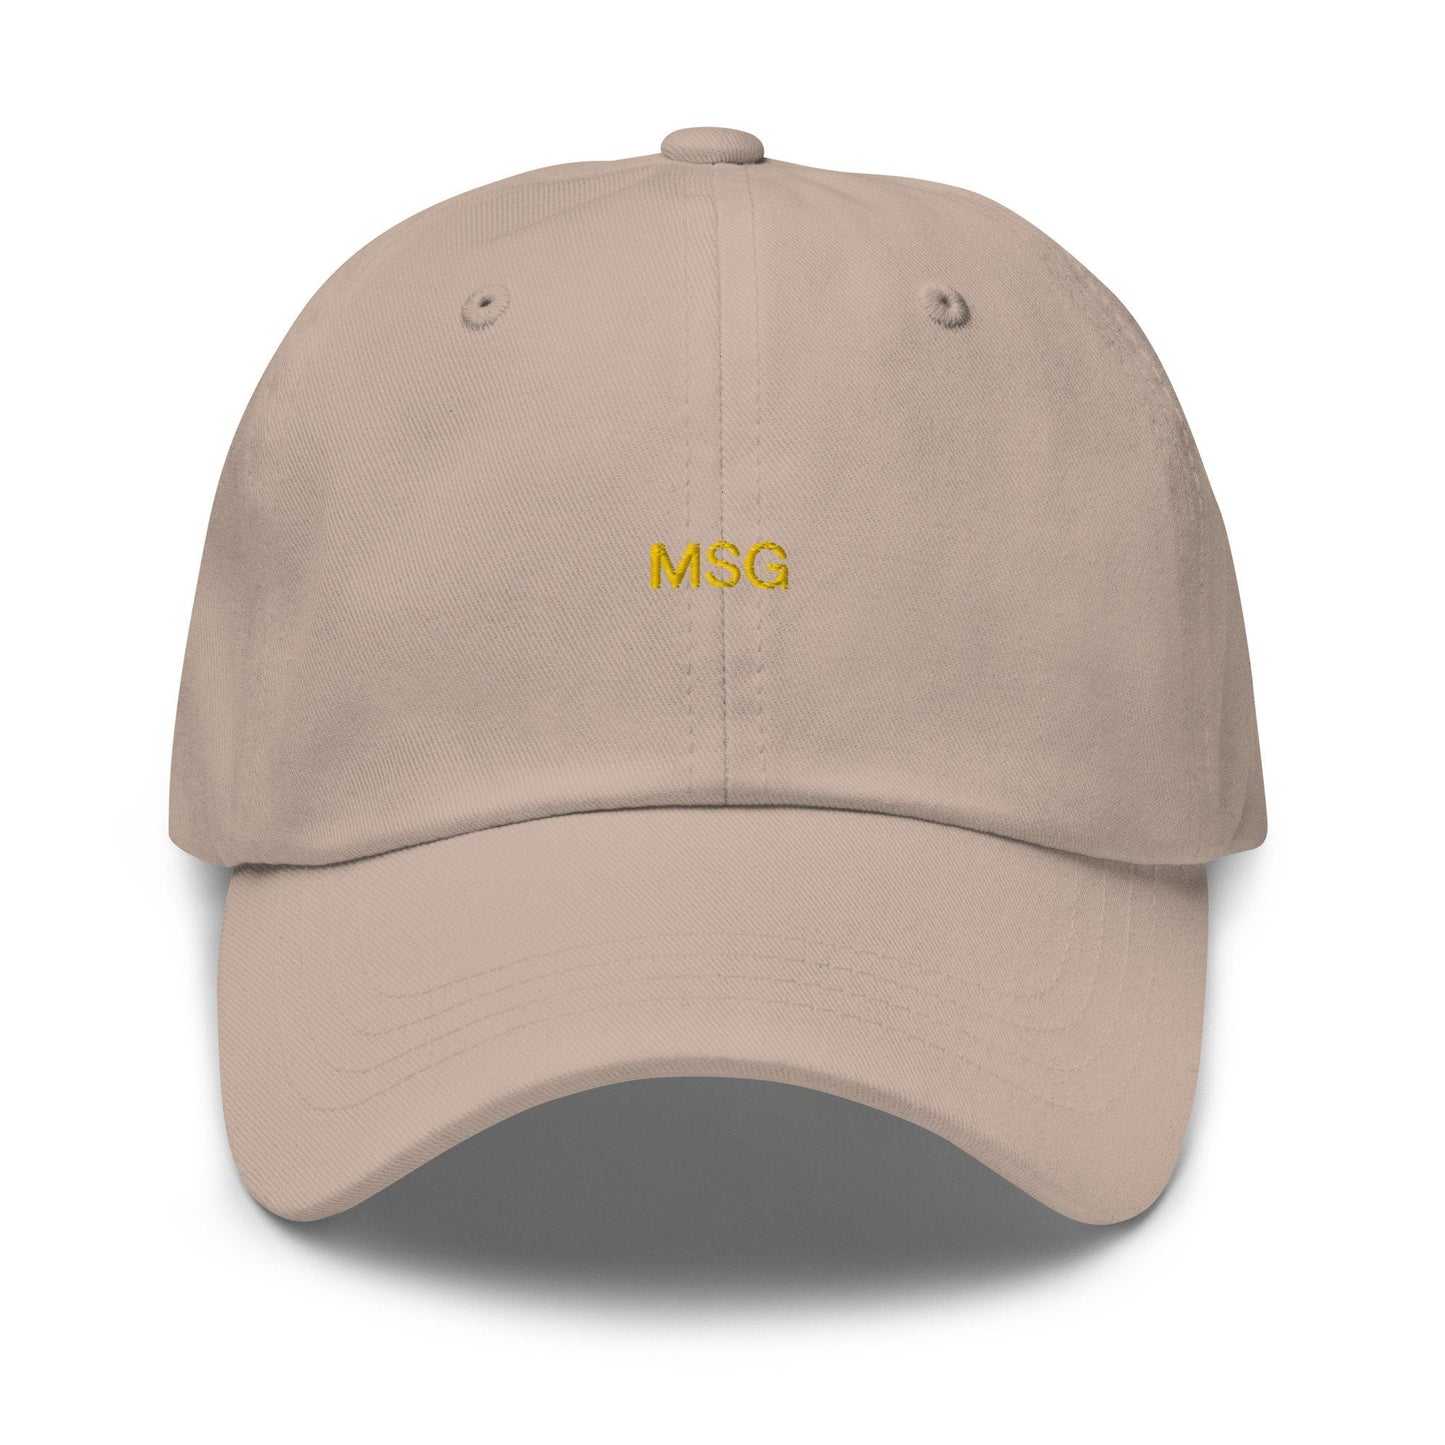 MSG Dad Hat - Gift for Asian Food Lovers - Cotton Embroidered Baseball Cap - Multiple Colors